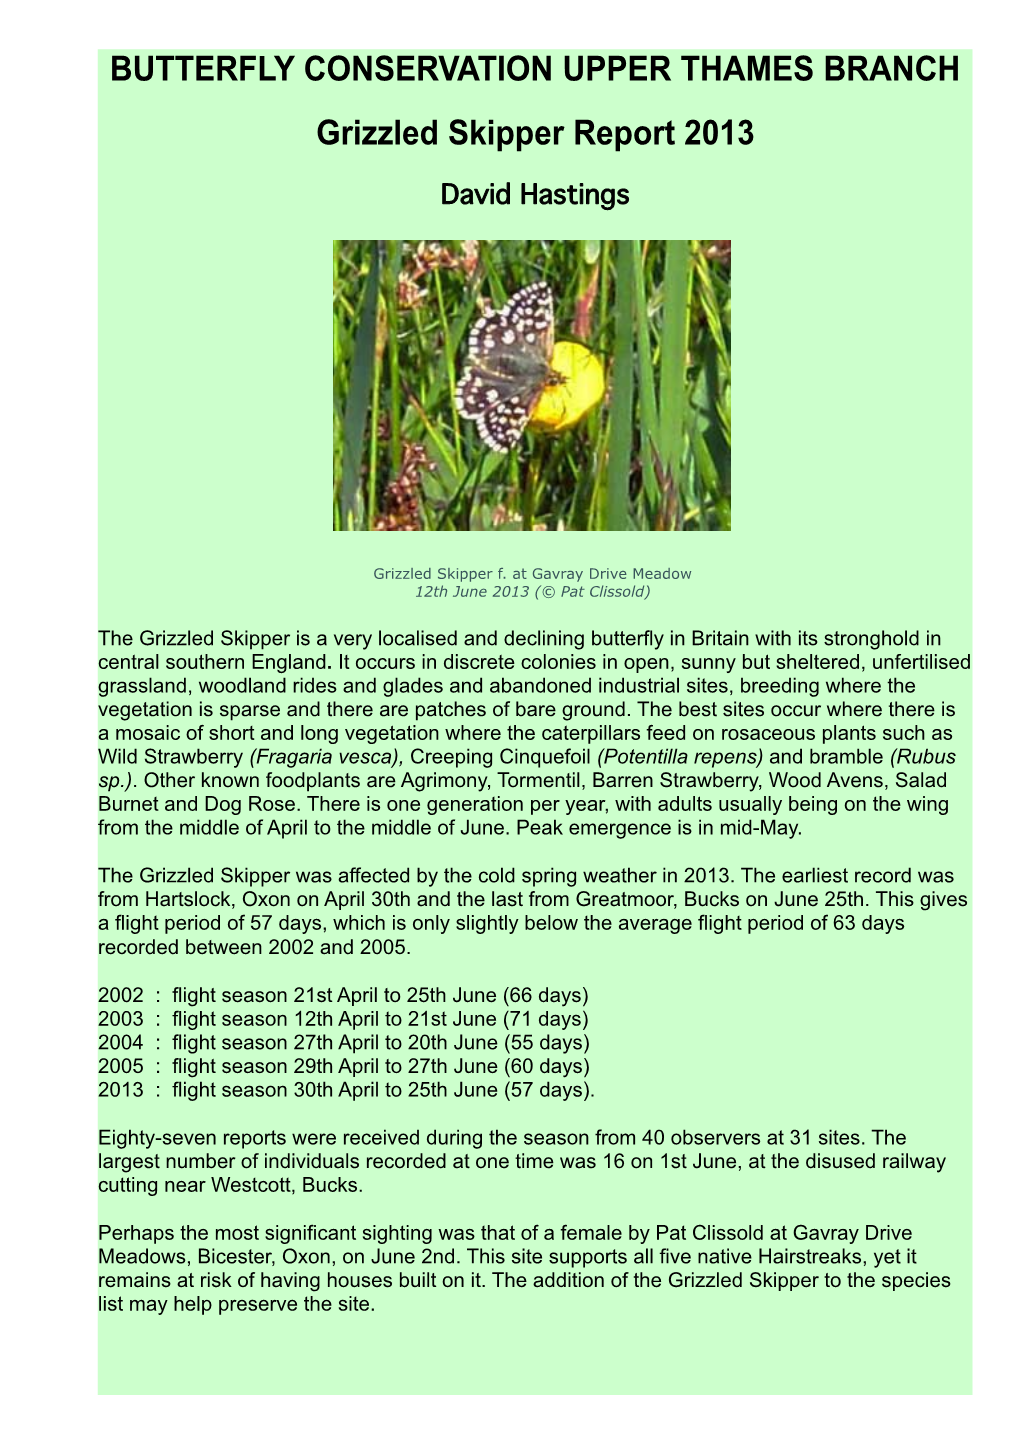 BUTTERFLY CONSERVATION UPPER THAMES BRANCH Grizzled Skipper Report 2013